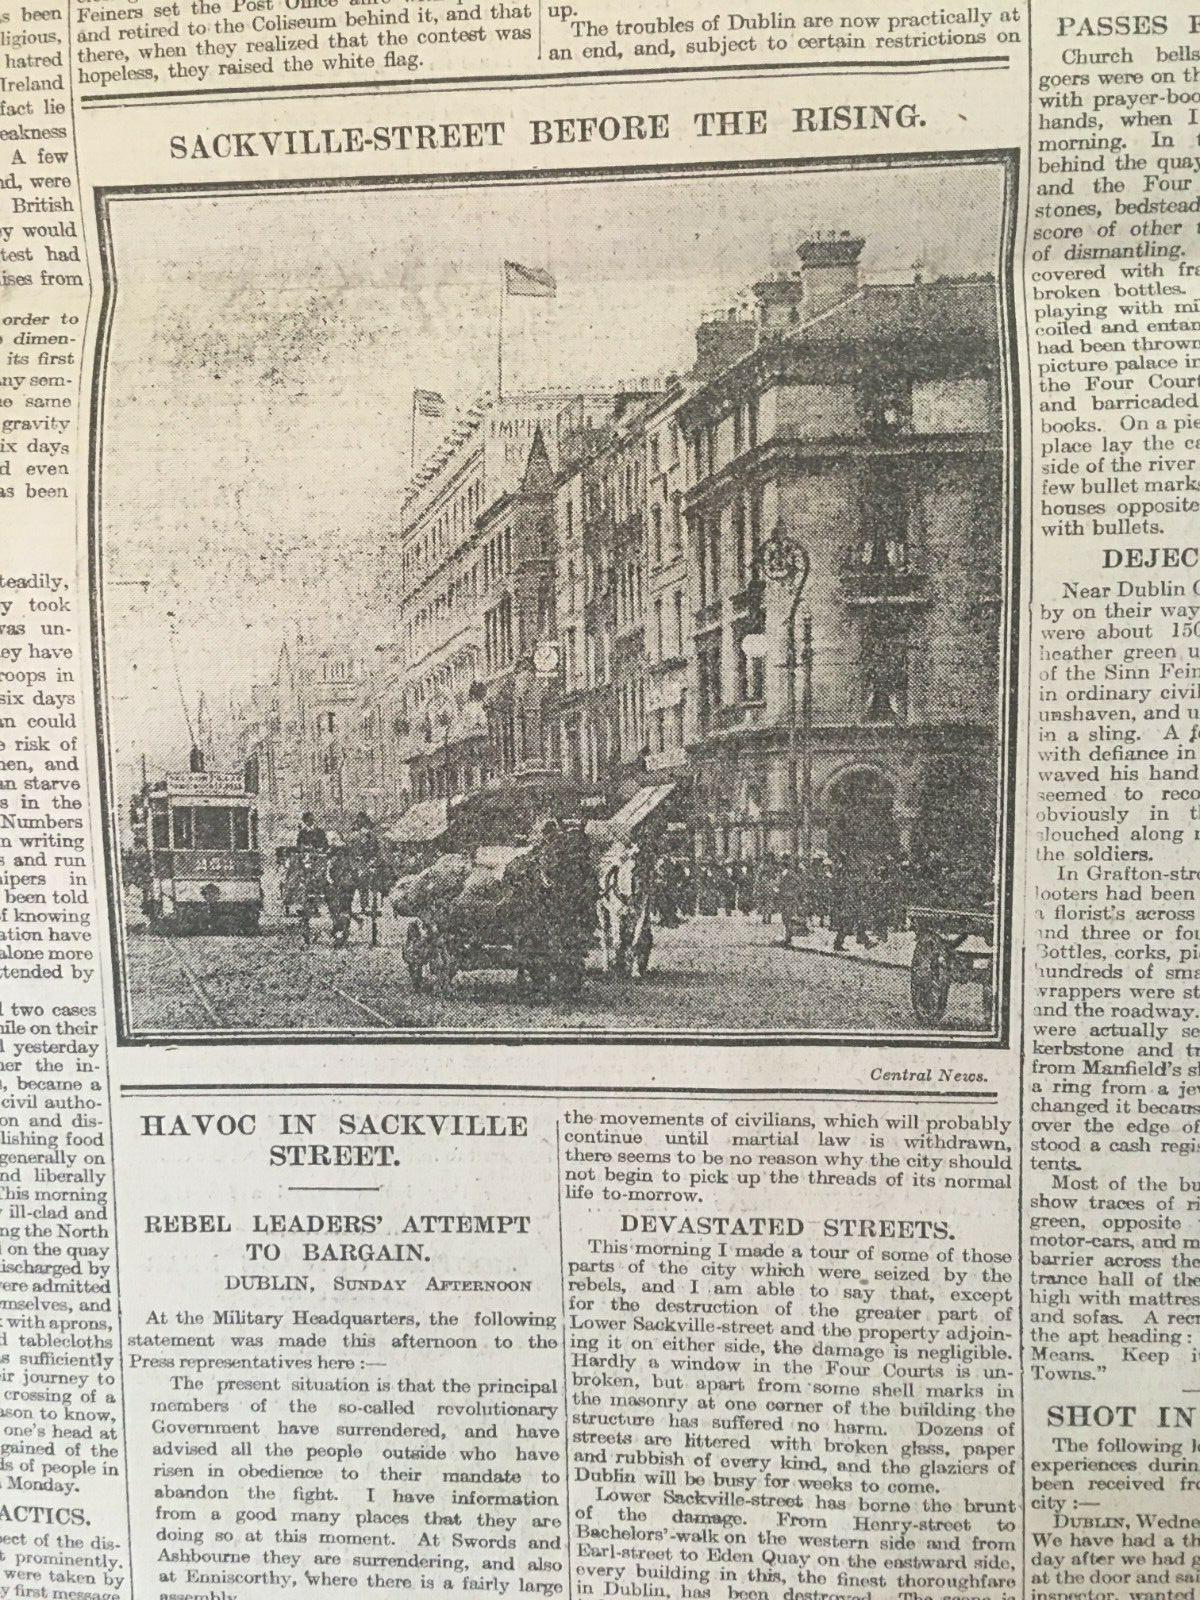 Easter Rising Rebellion 1916 Original Complete Newspaper 2nd May Images & Reports - Image 2 of 12